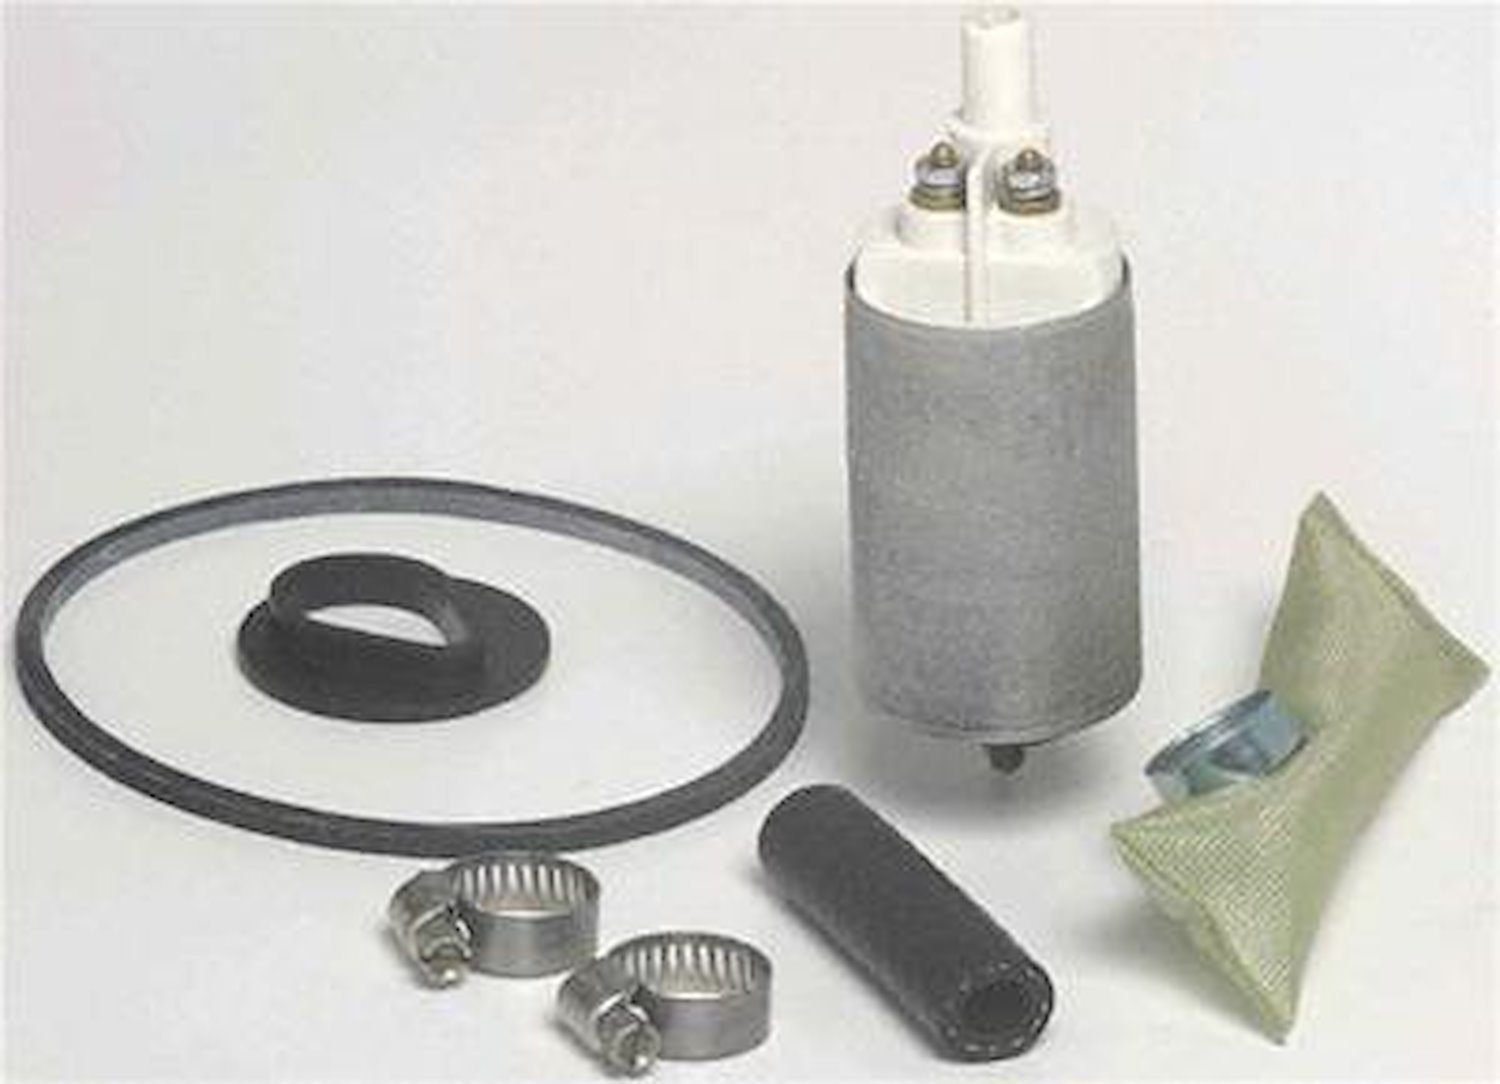 EFI In-Tank Electric Fuel Pump And Strainer Set for 1984-1991 Ford/Mercury